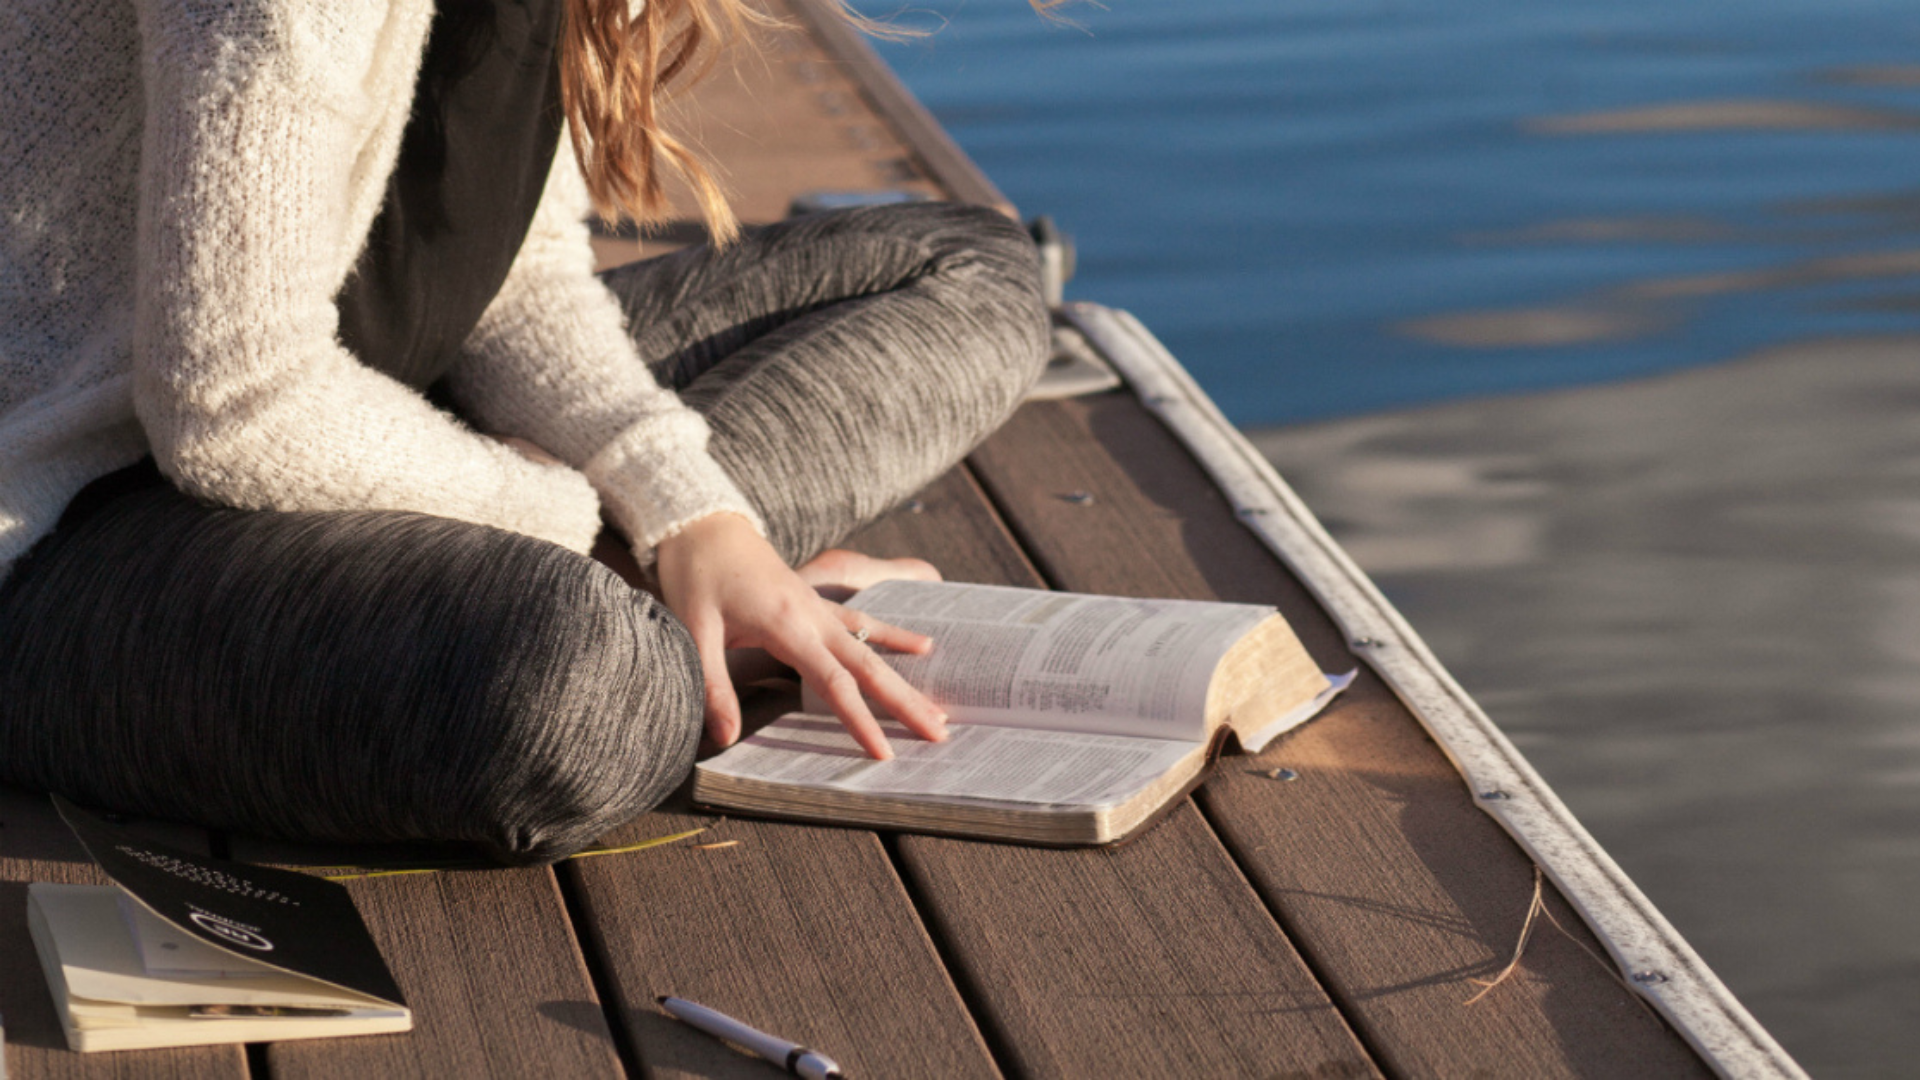 A woman reading a Bible while sitting on a wooden platform